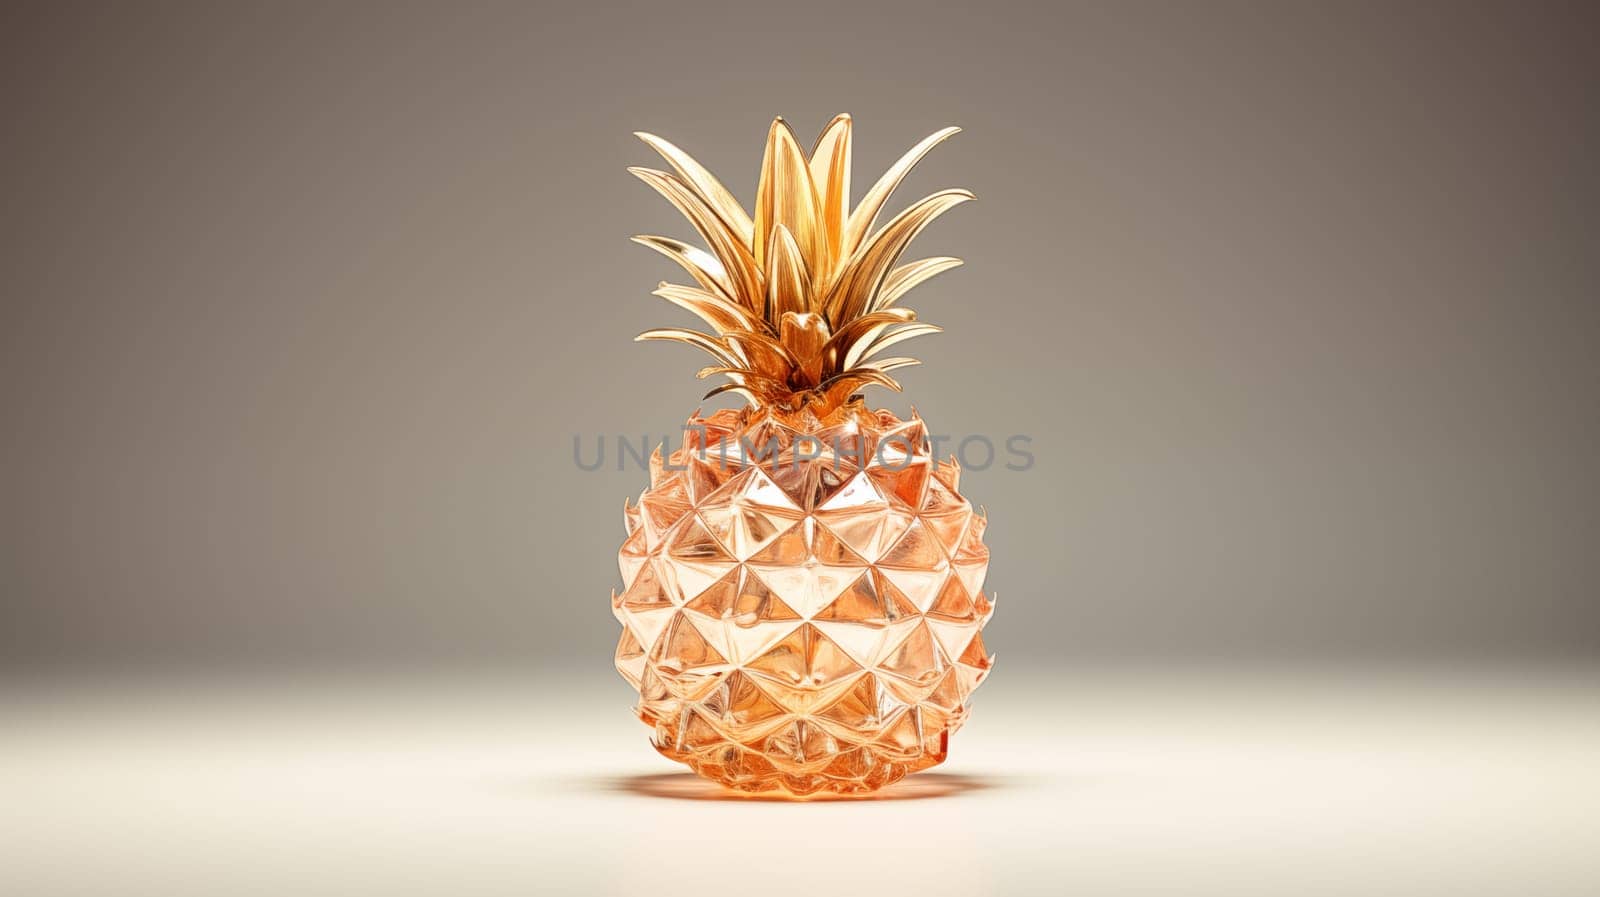 A glass bottle in the form of a peach-colored pineapple stands isolated on a gray background.